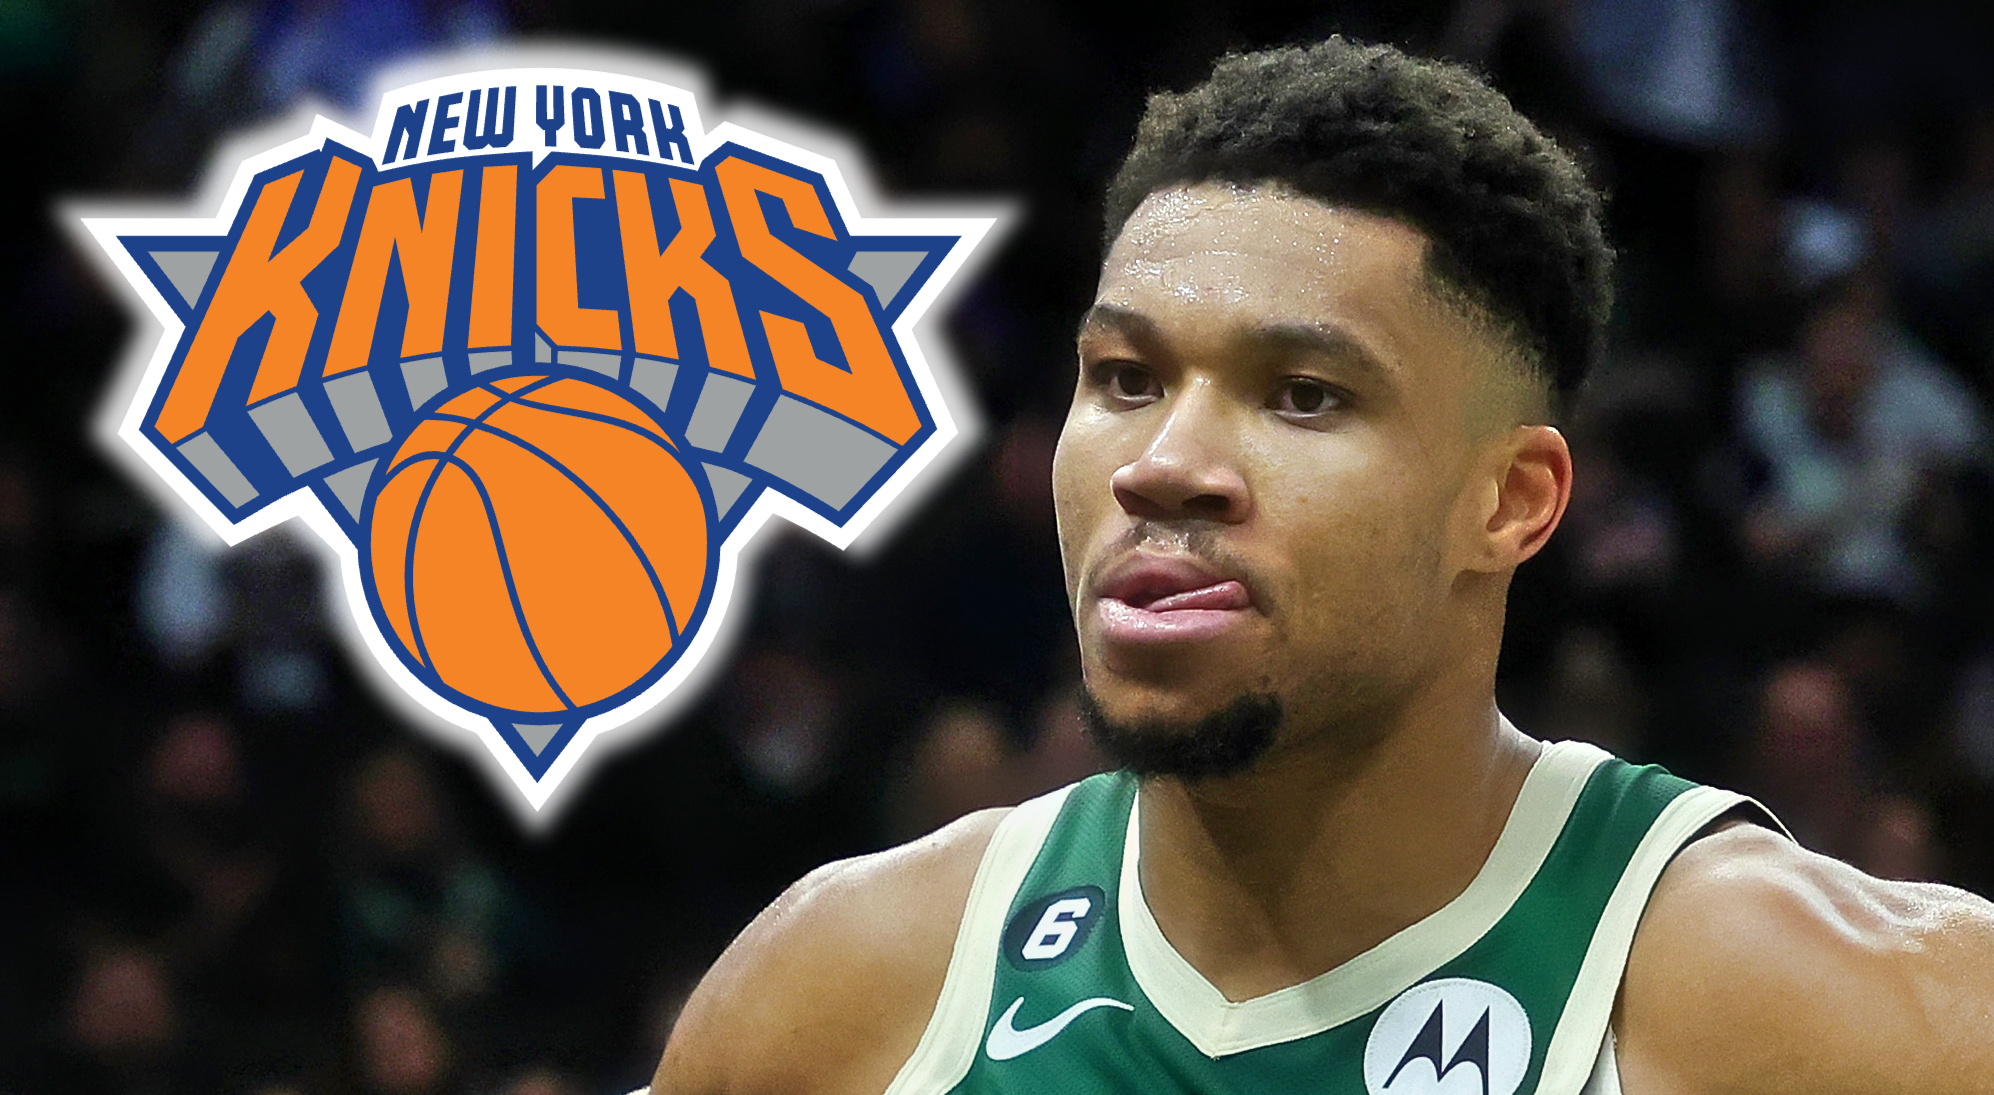 Did the door Giannis Antetokounmpo opened lead to the Knicks?